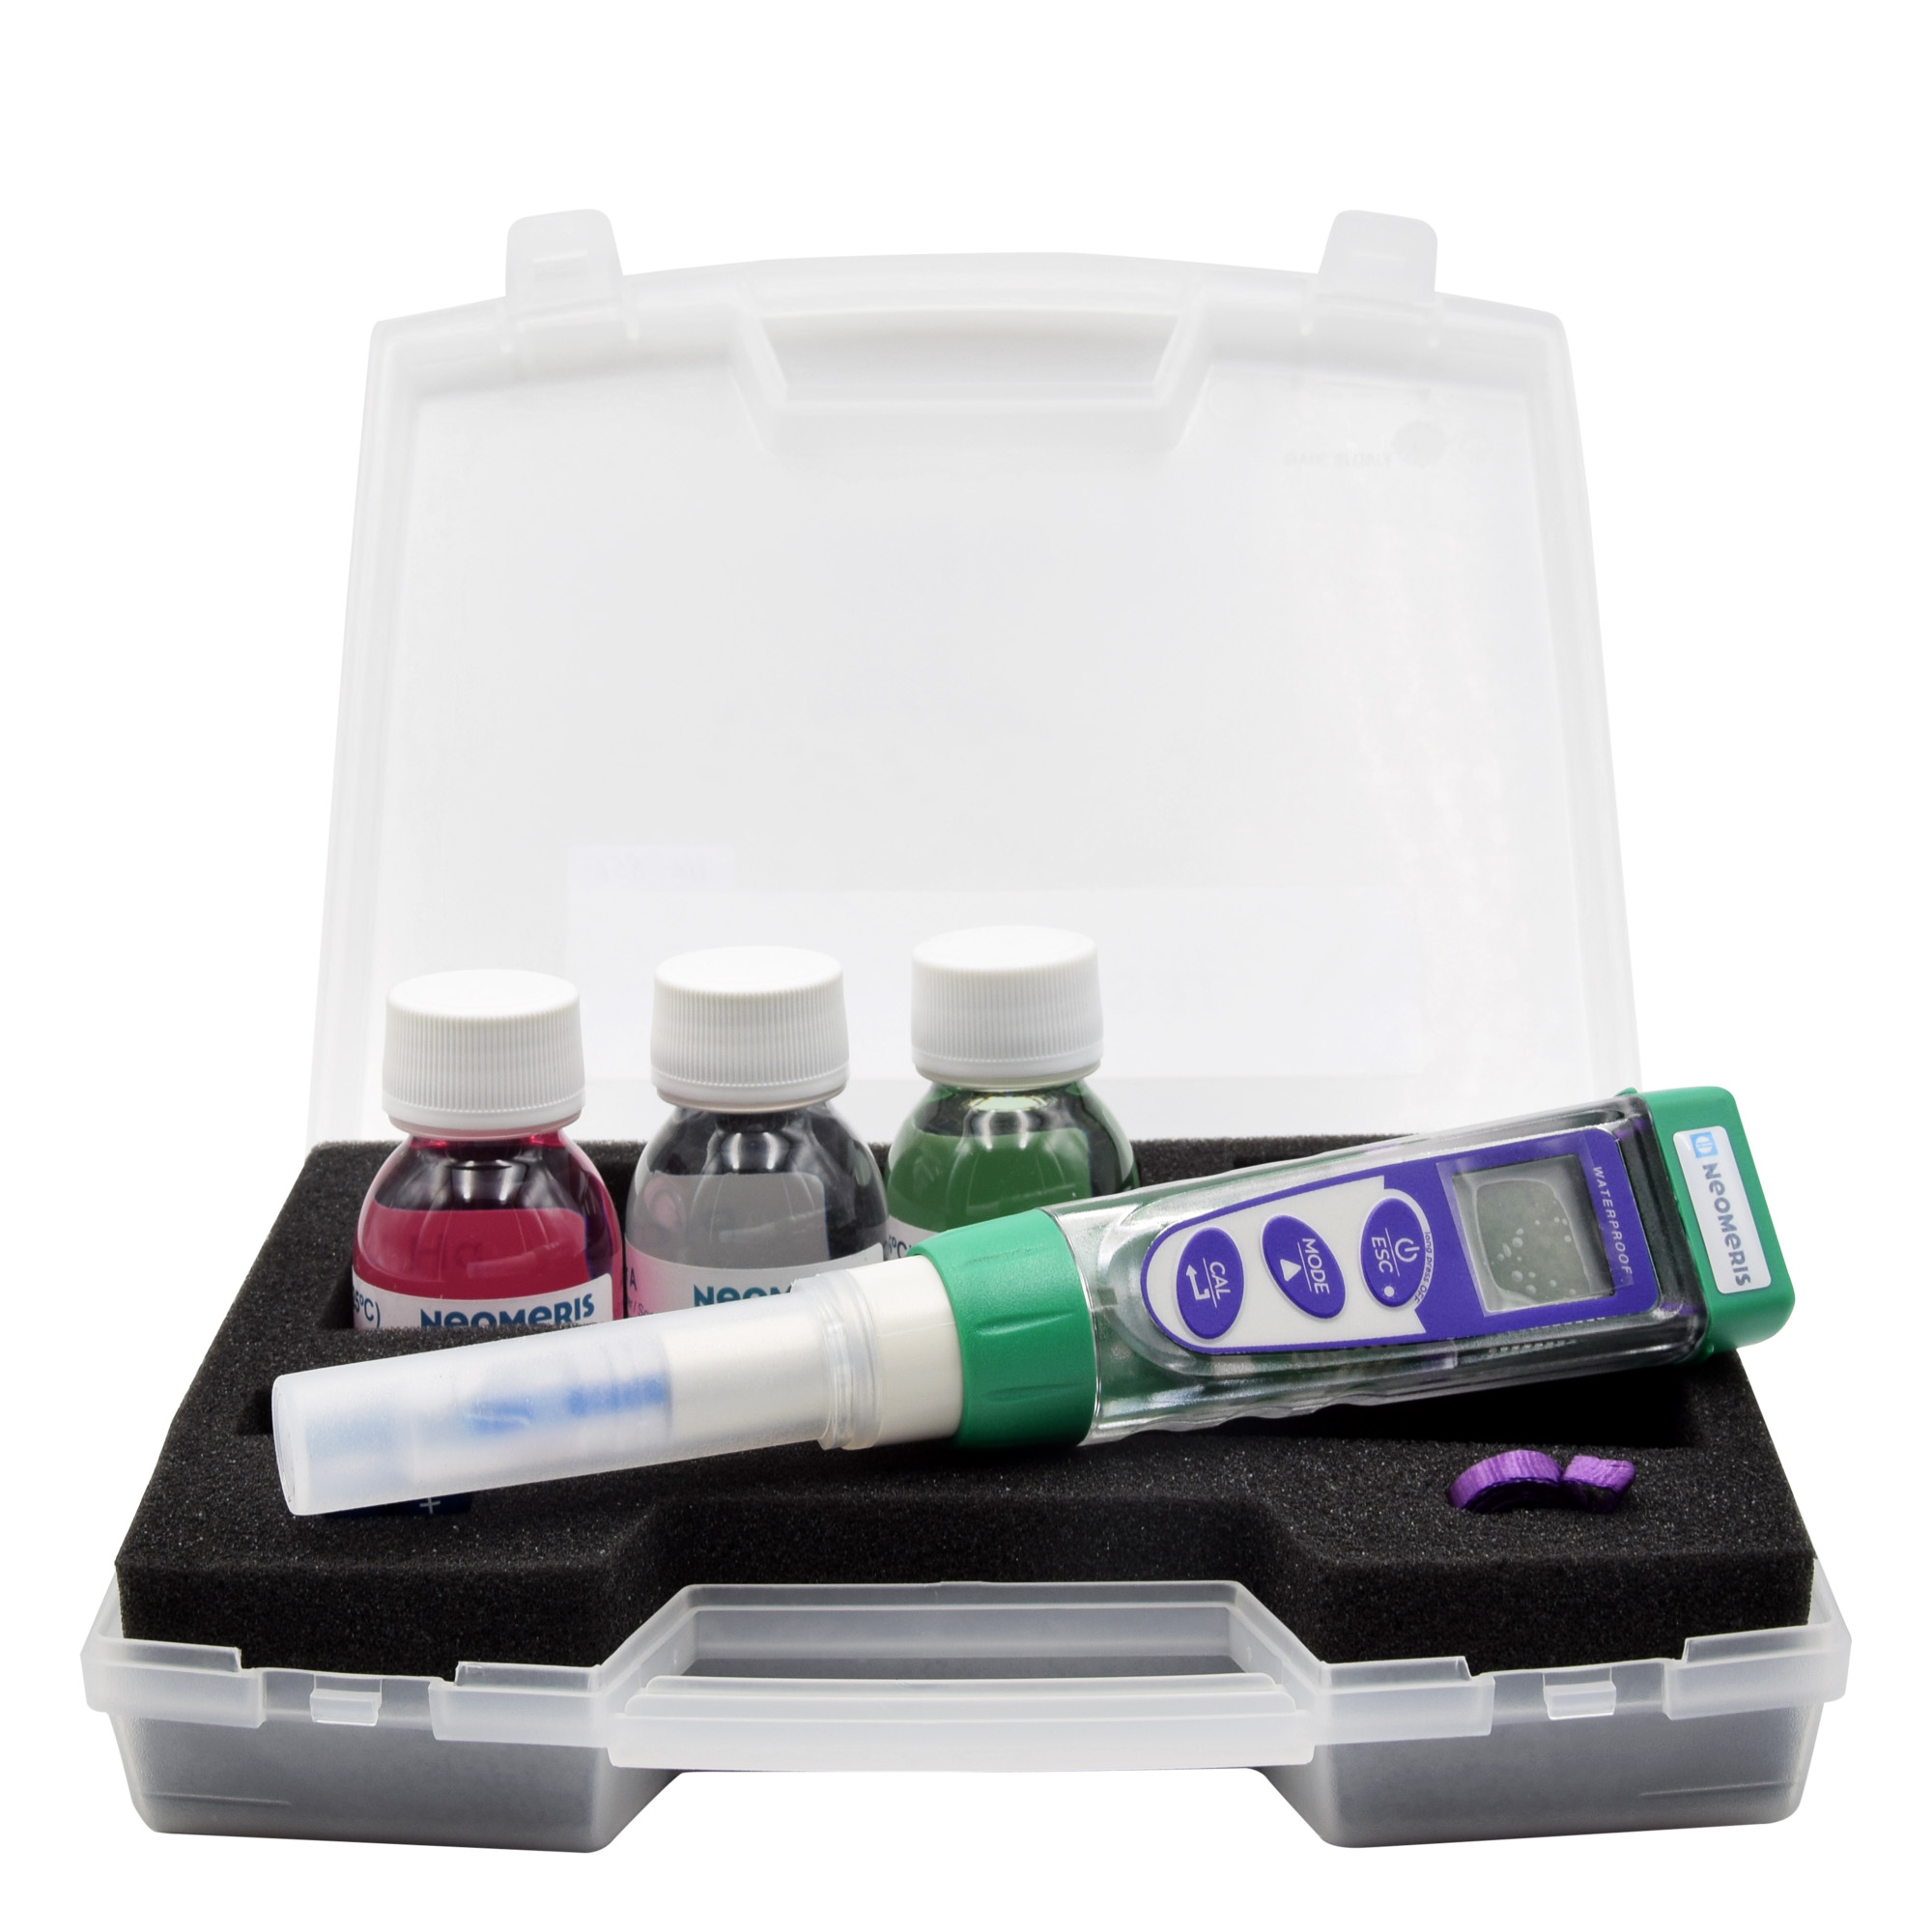 XS pH 5 Tester in carrying case - Hand tester for determining the pH value and temperature